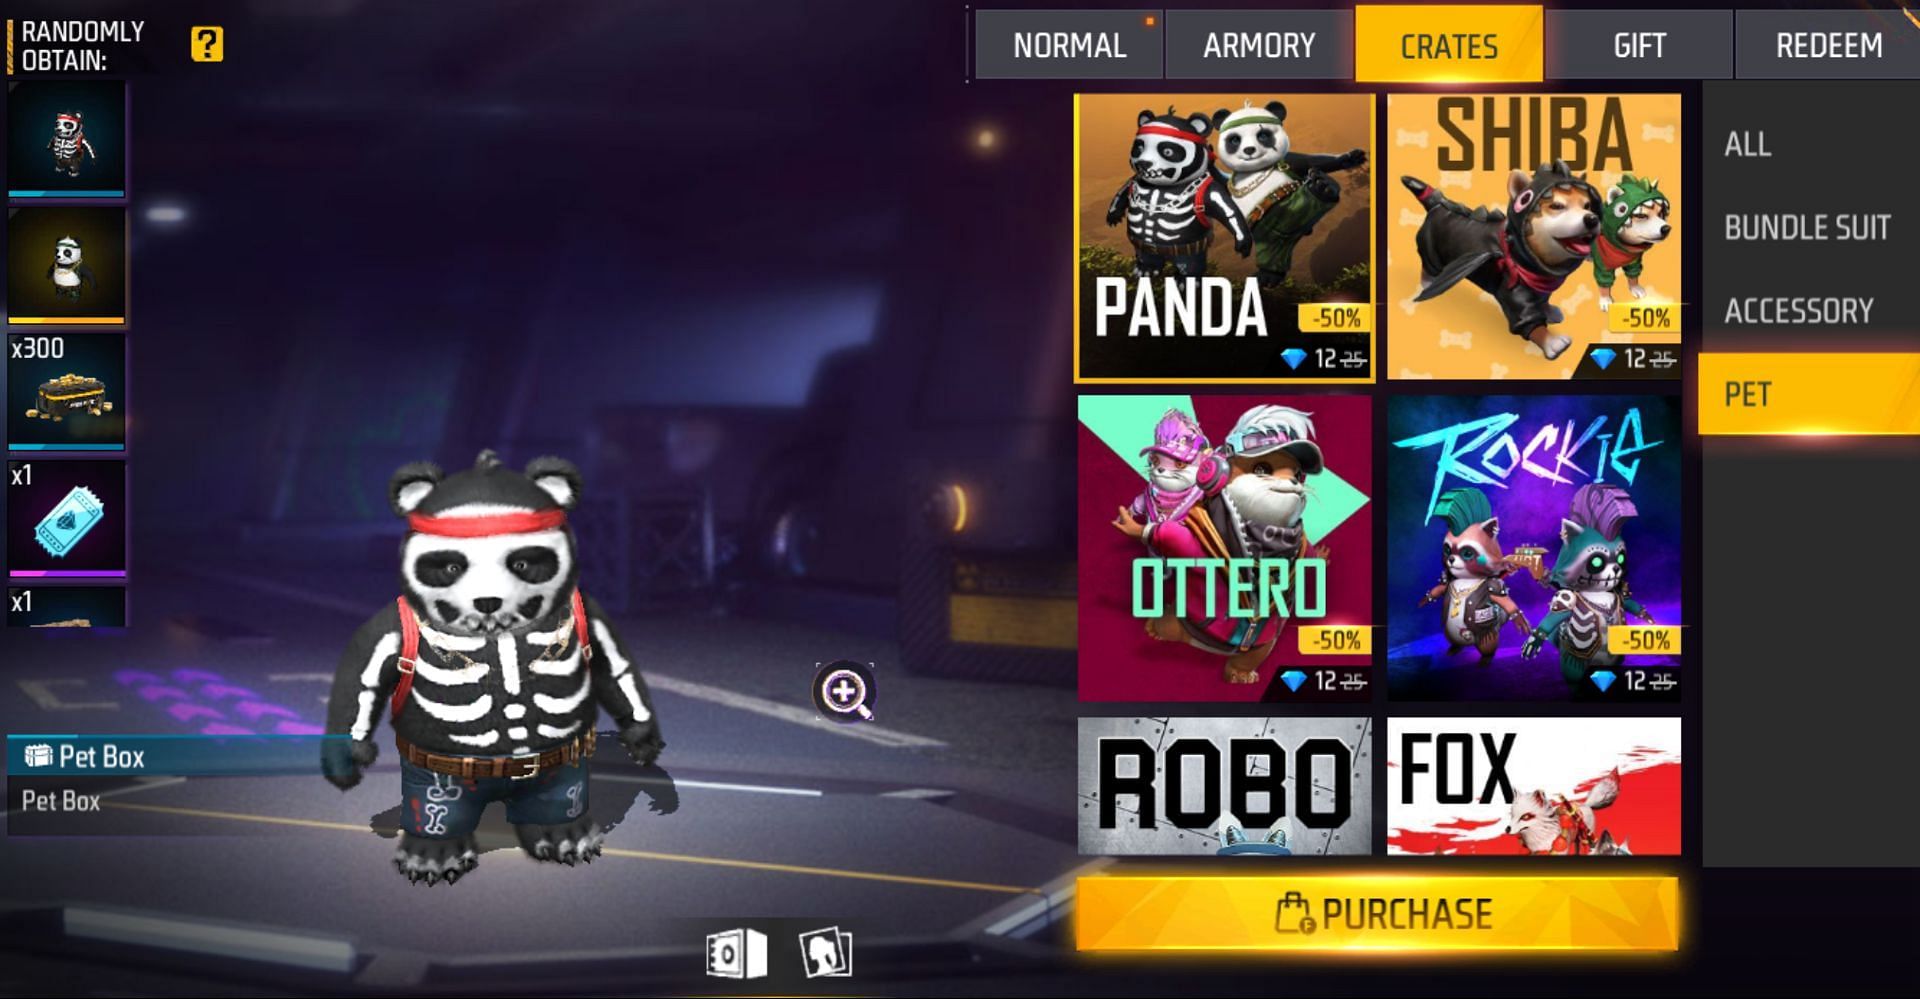 There are relatively few pet crates in the store (Image via Garena)